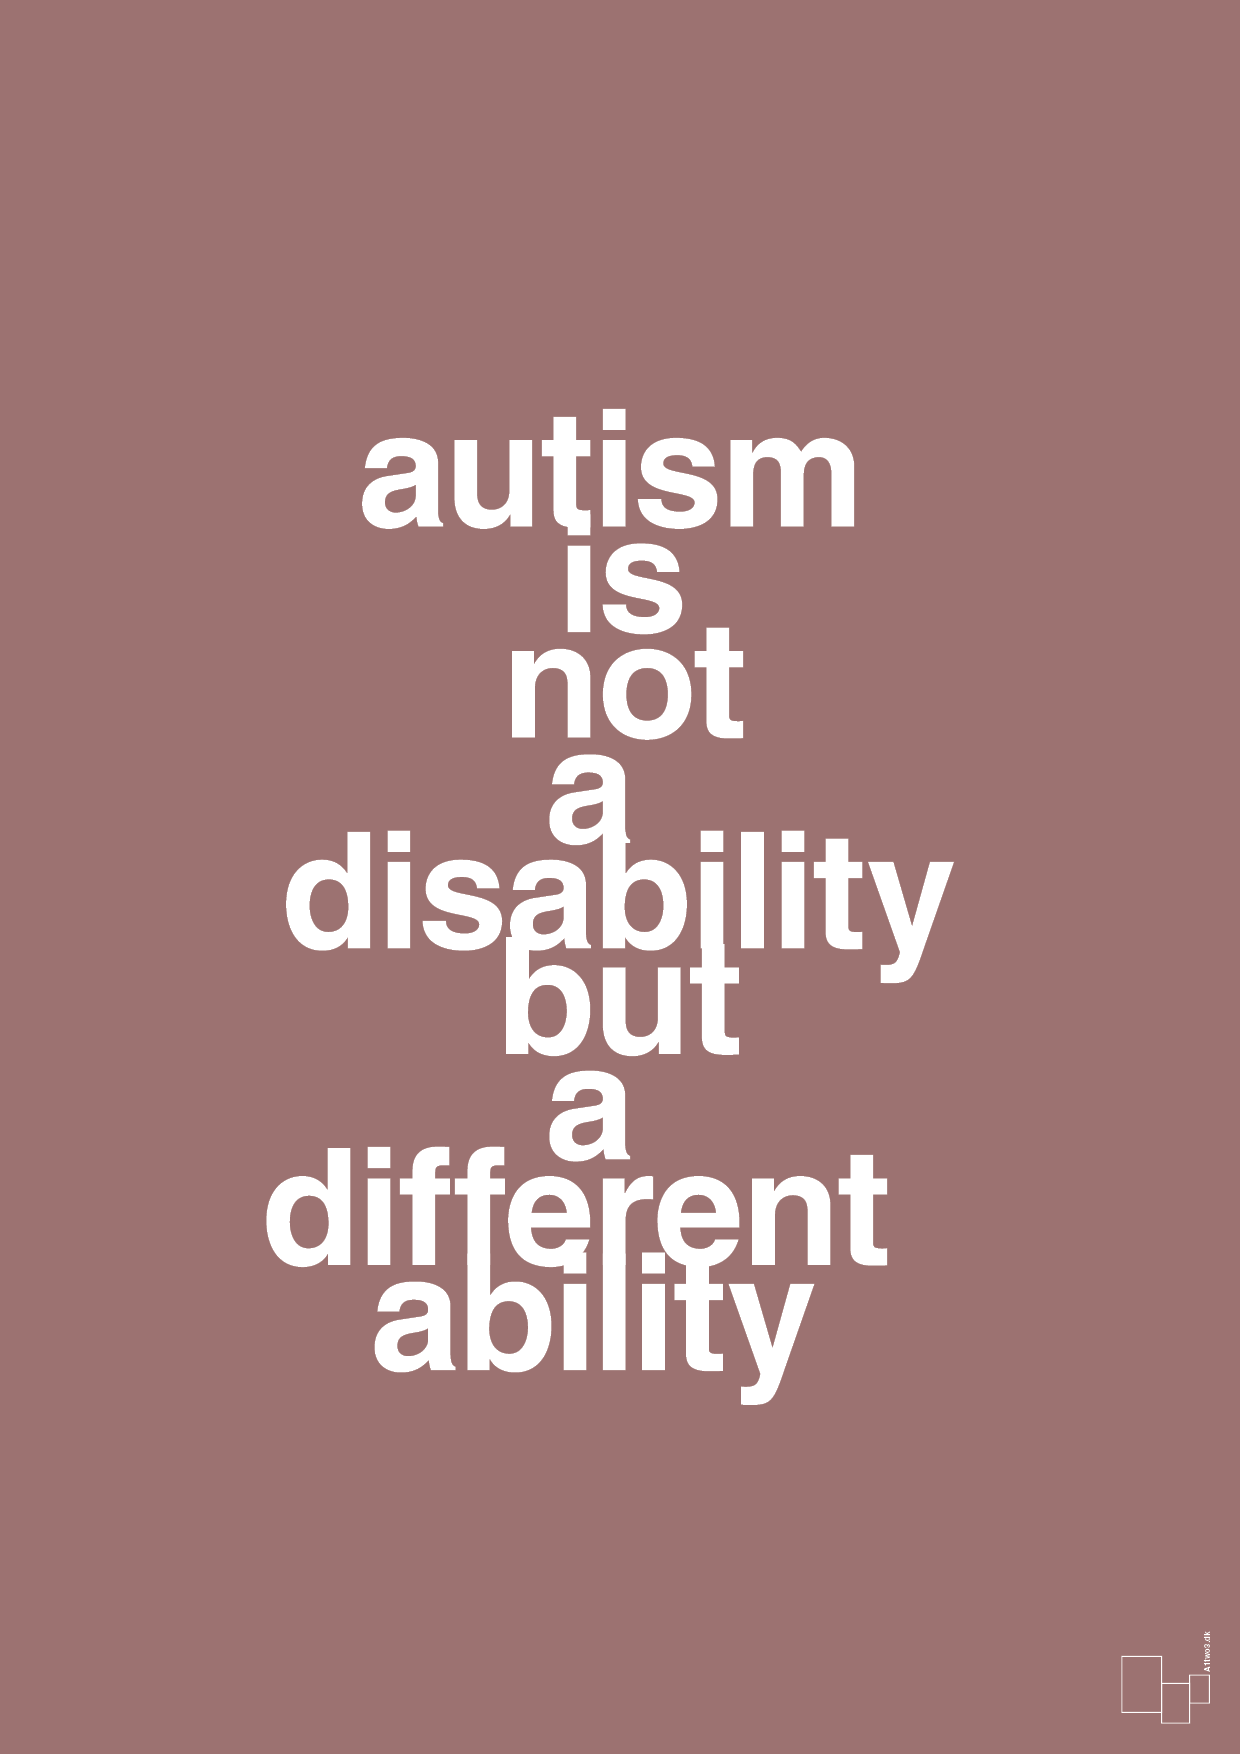 autism is not a disability but a different ability - Plakat med Samfund i Plum